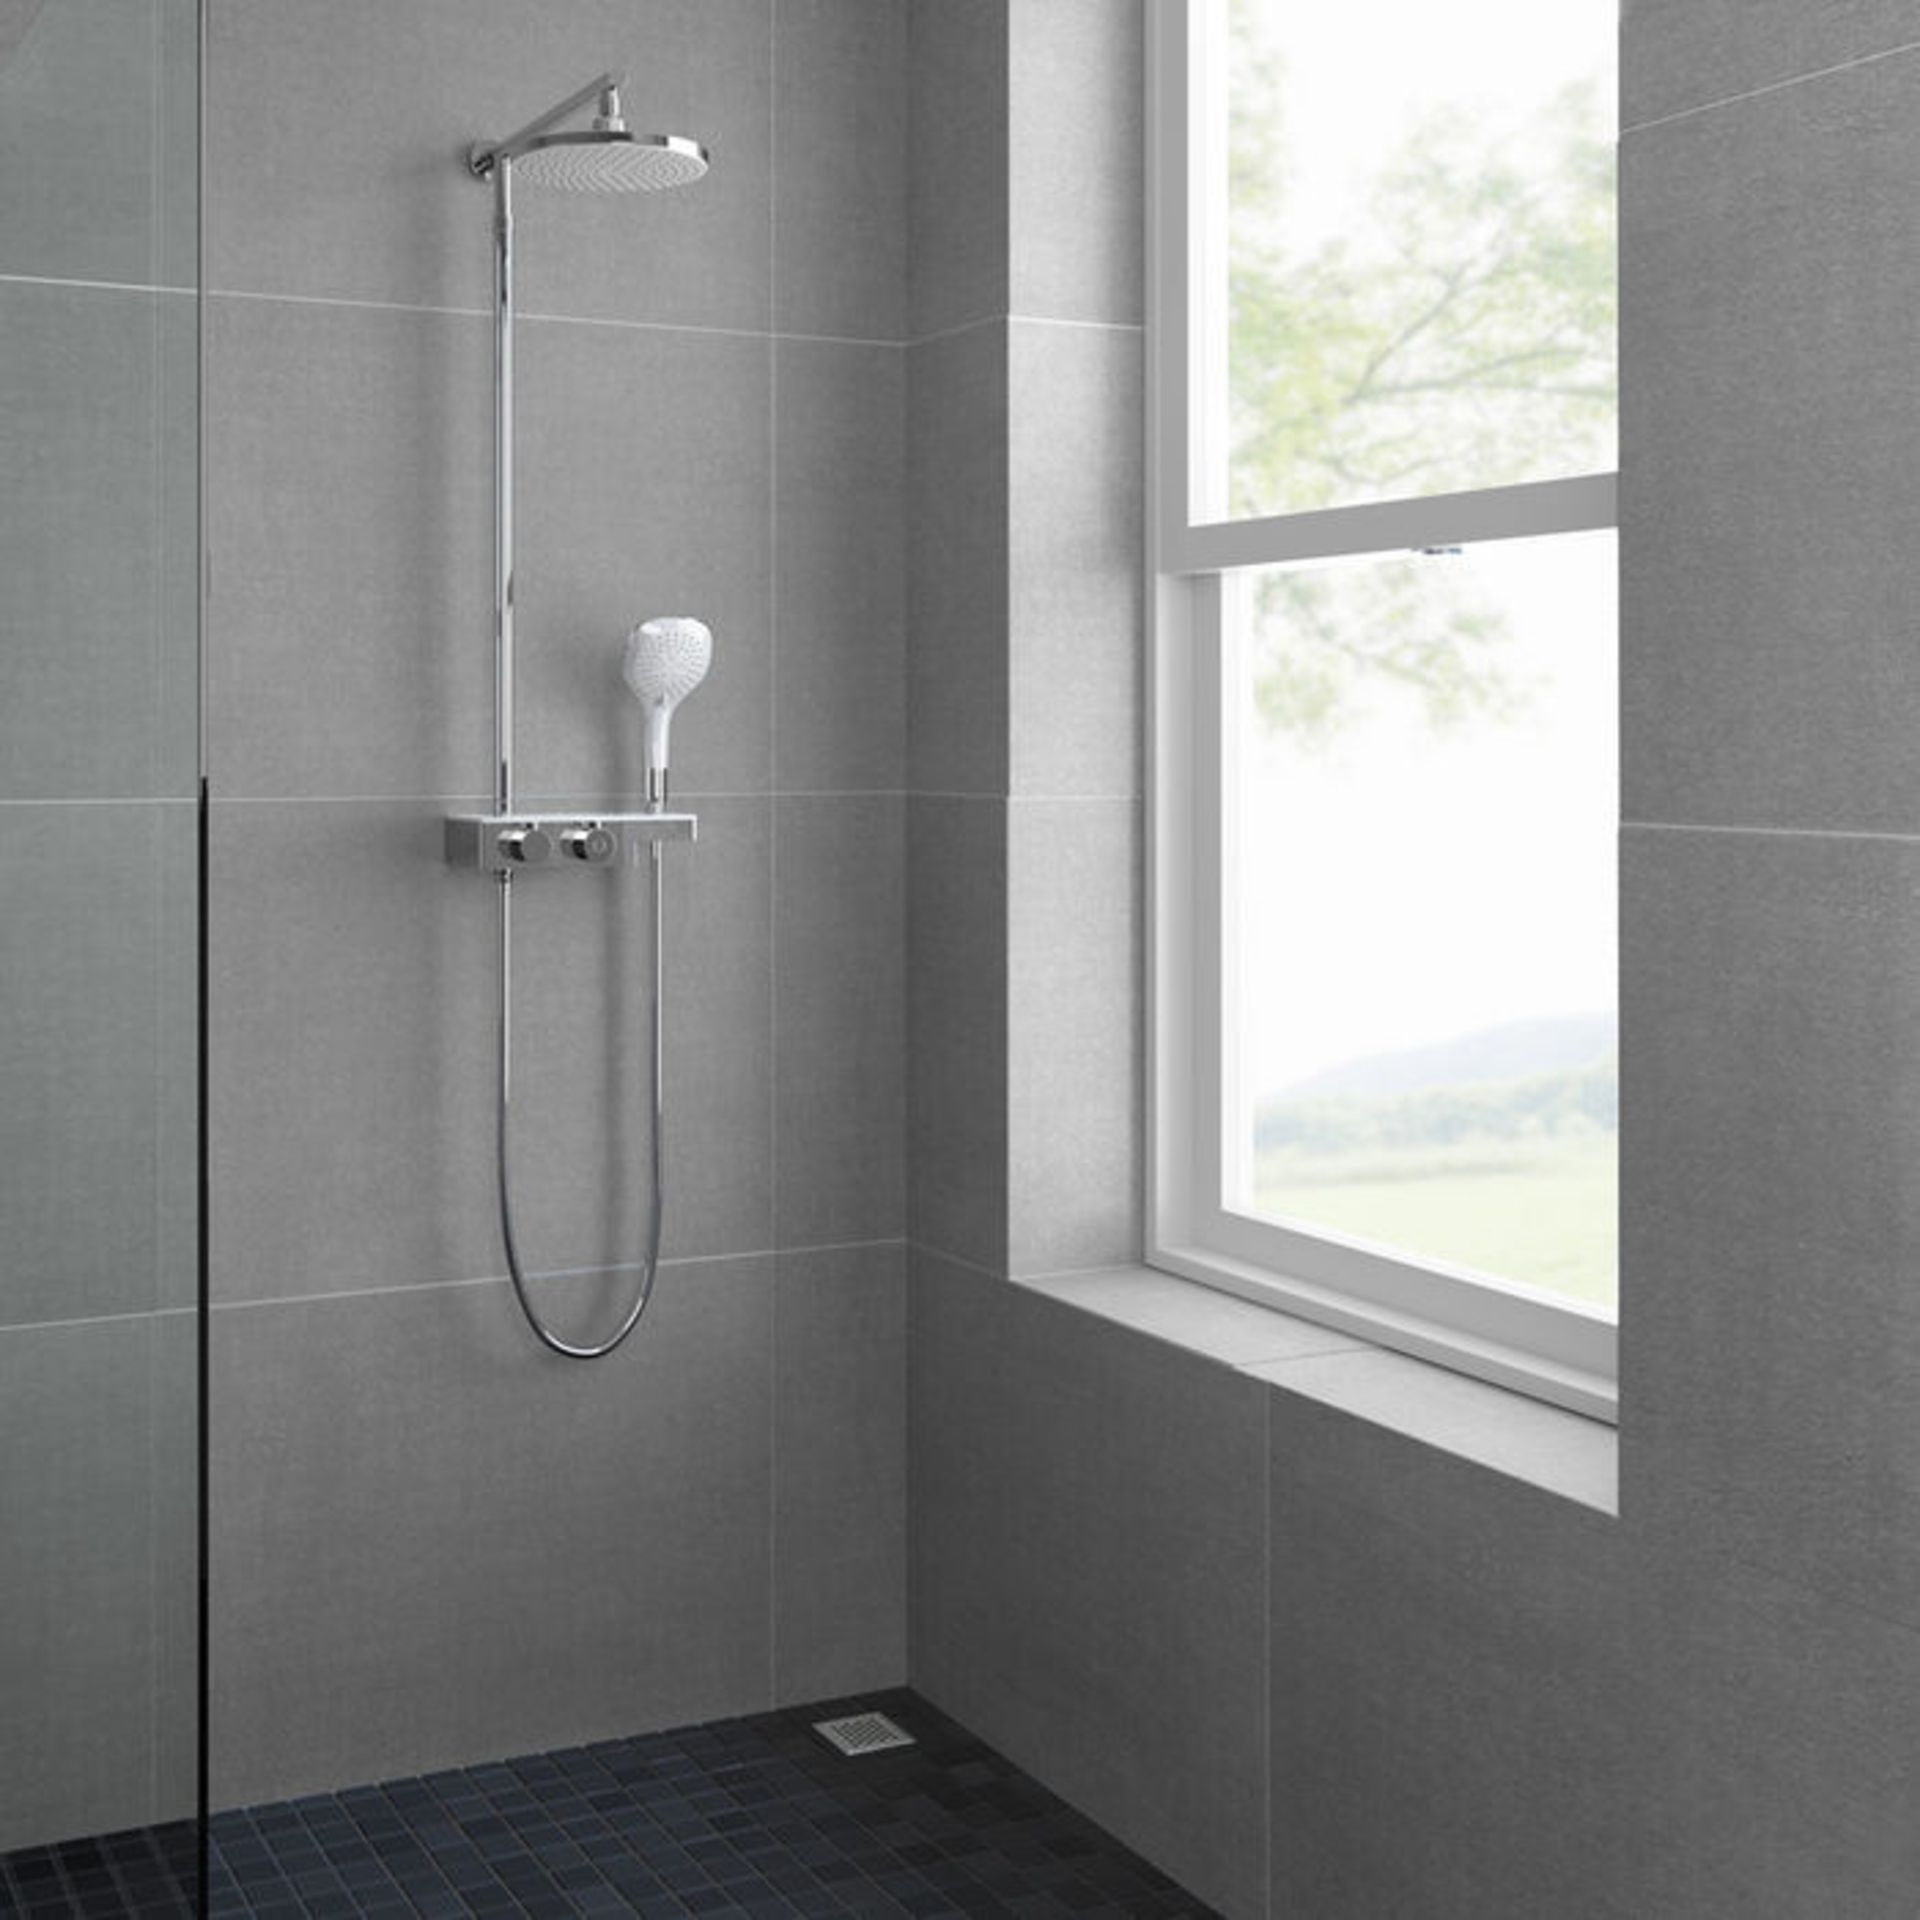 (LU123) Round Exposed Thermostatic Mixer Shower Kit Medium Head & Shelf. Cool to touch shower for - Image 5 of 5